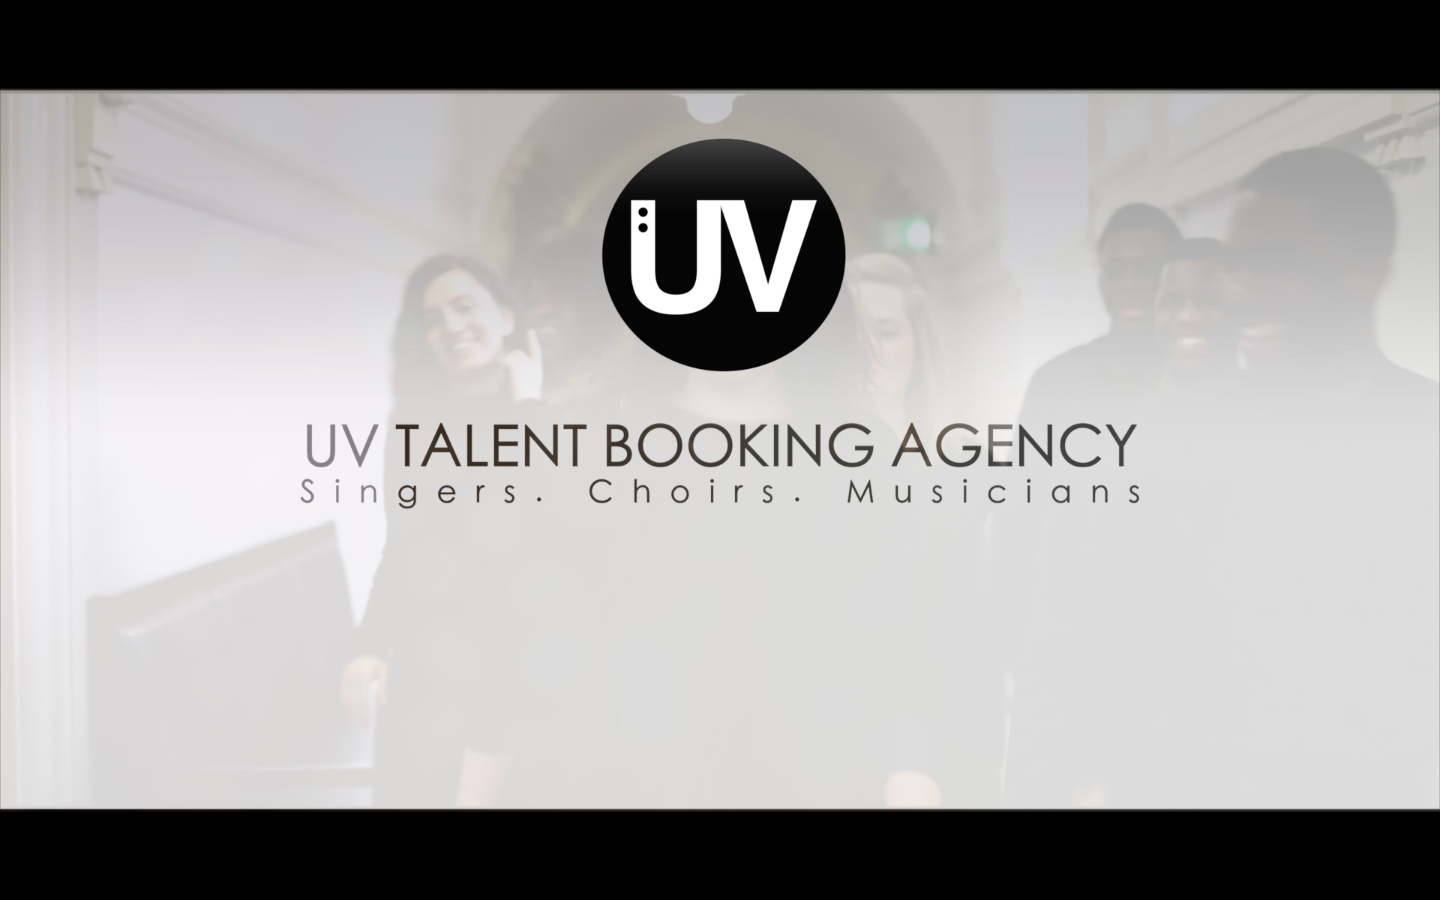 Singers, Choirs and Musicians available to book via UV Talent Agency